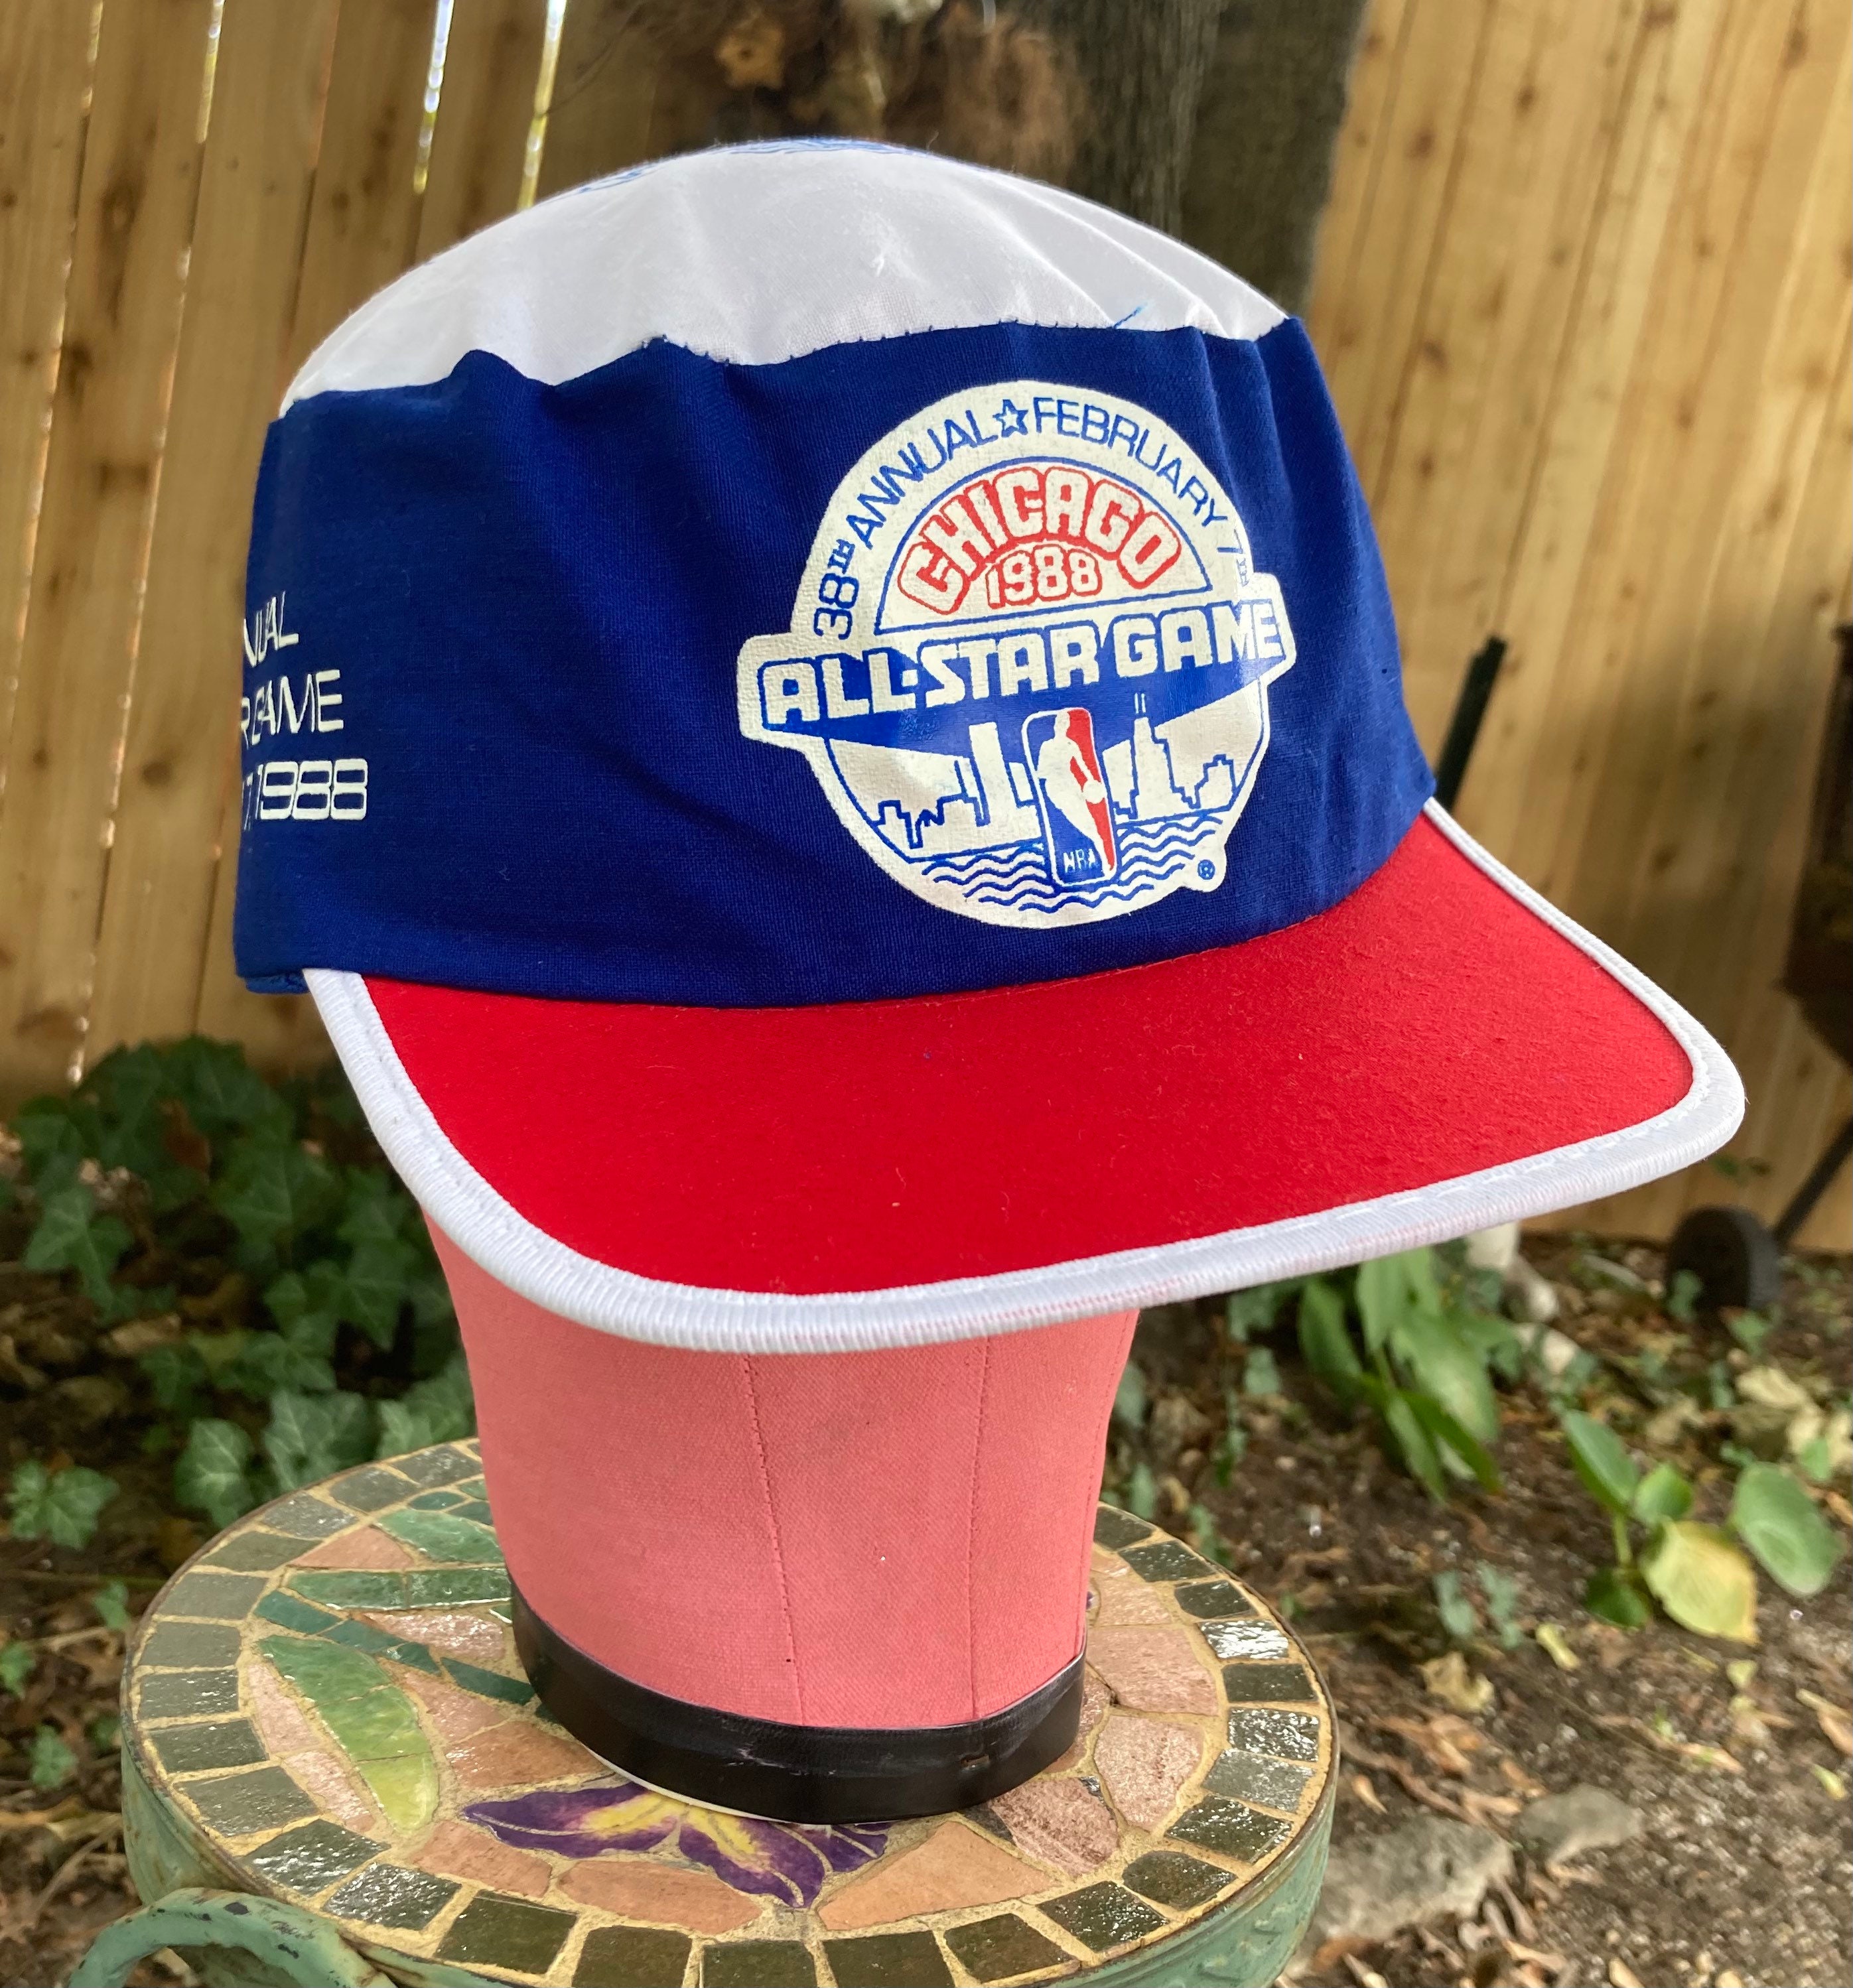 mlb all-star game hat Search Results